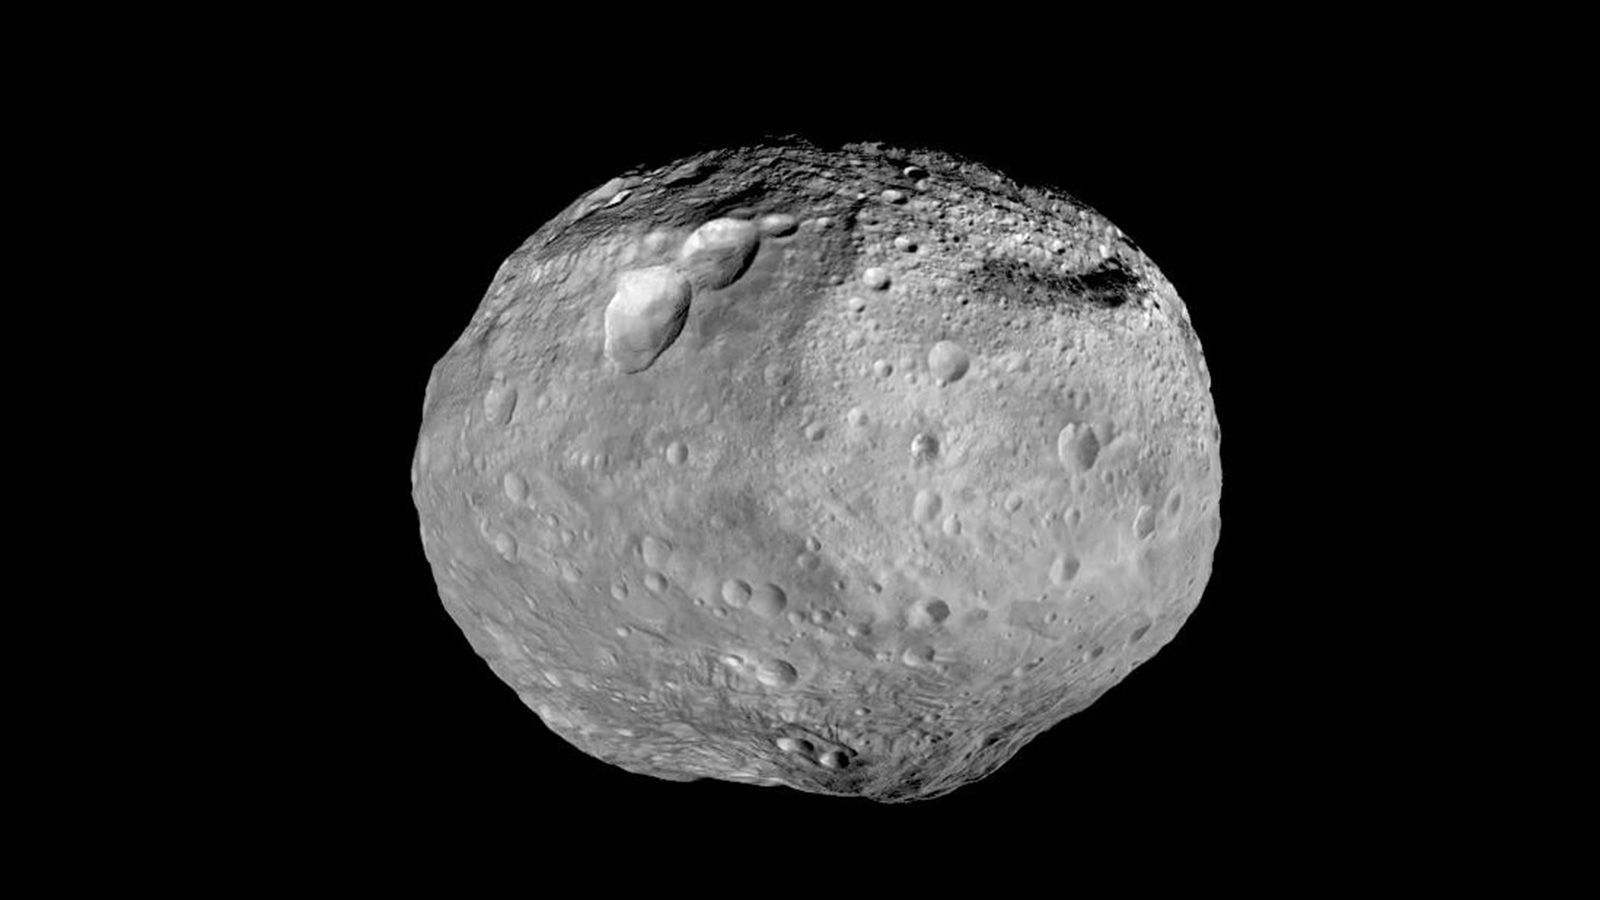 Full disk view of roundish asteroid